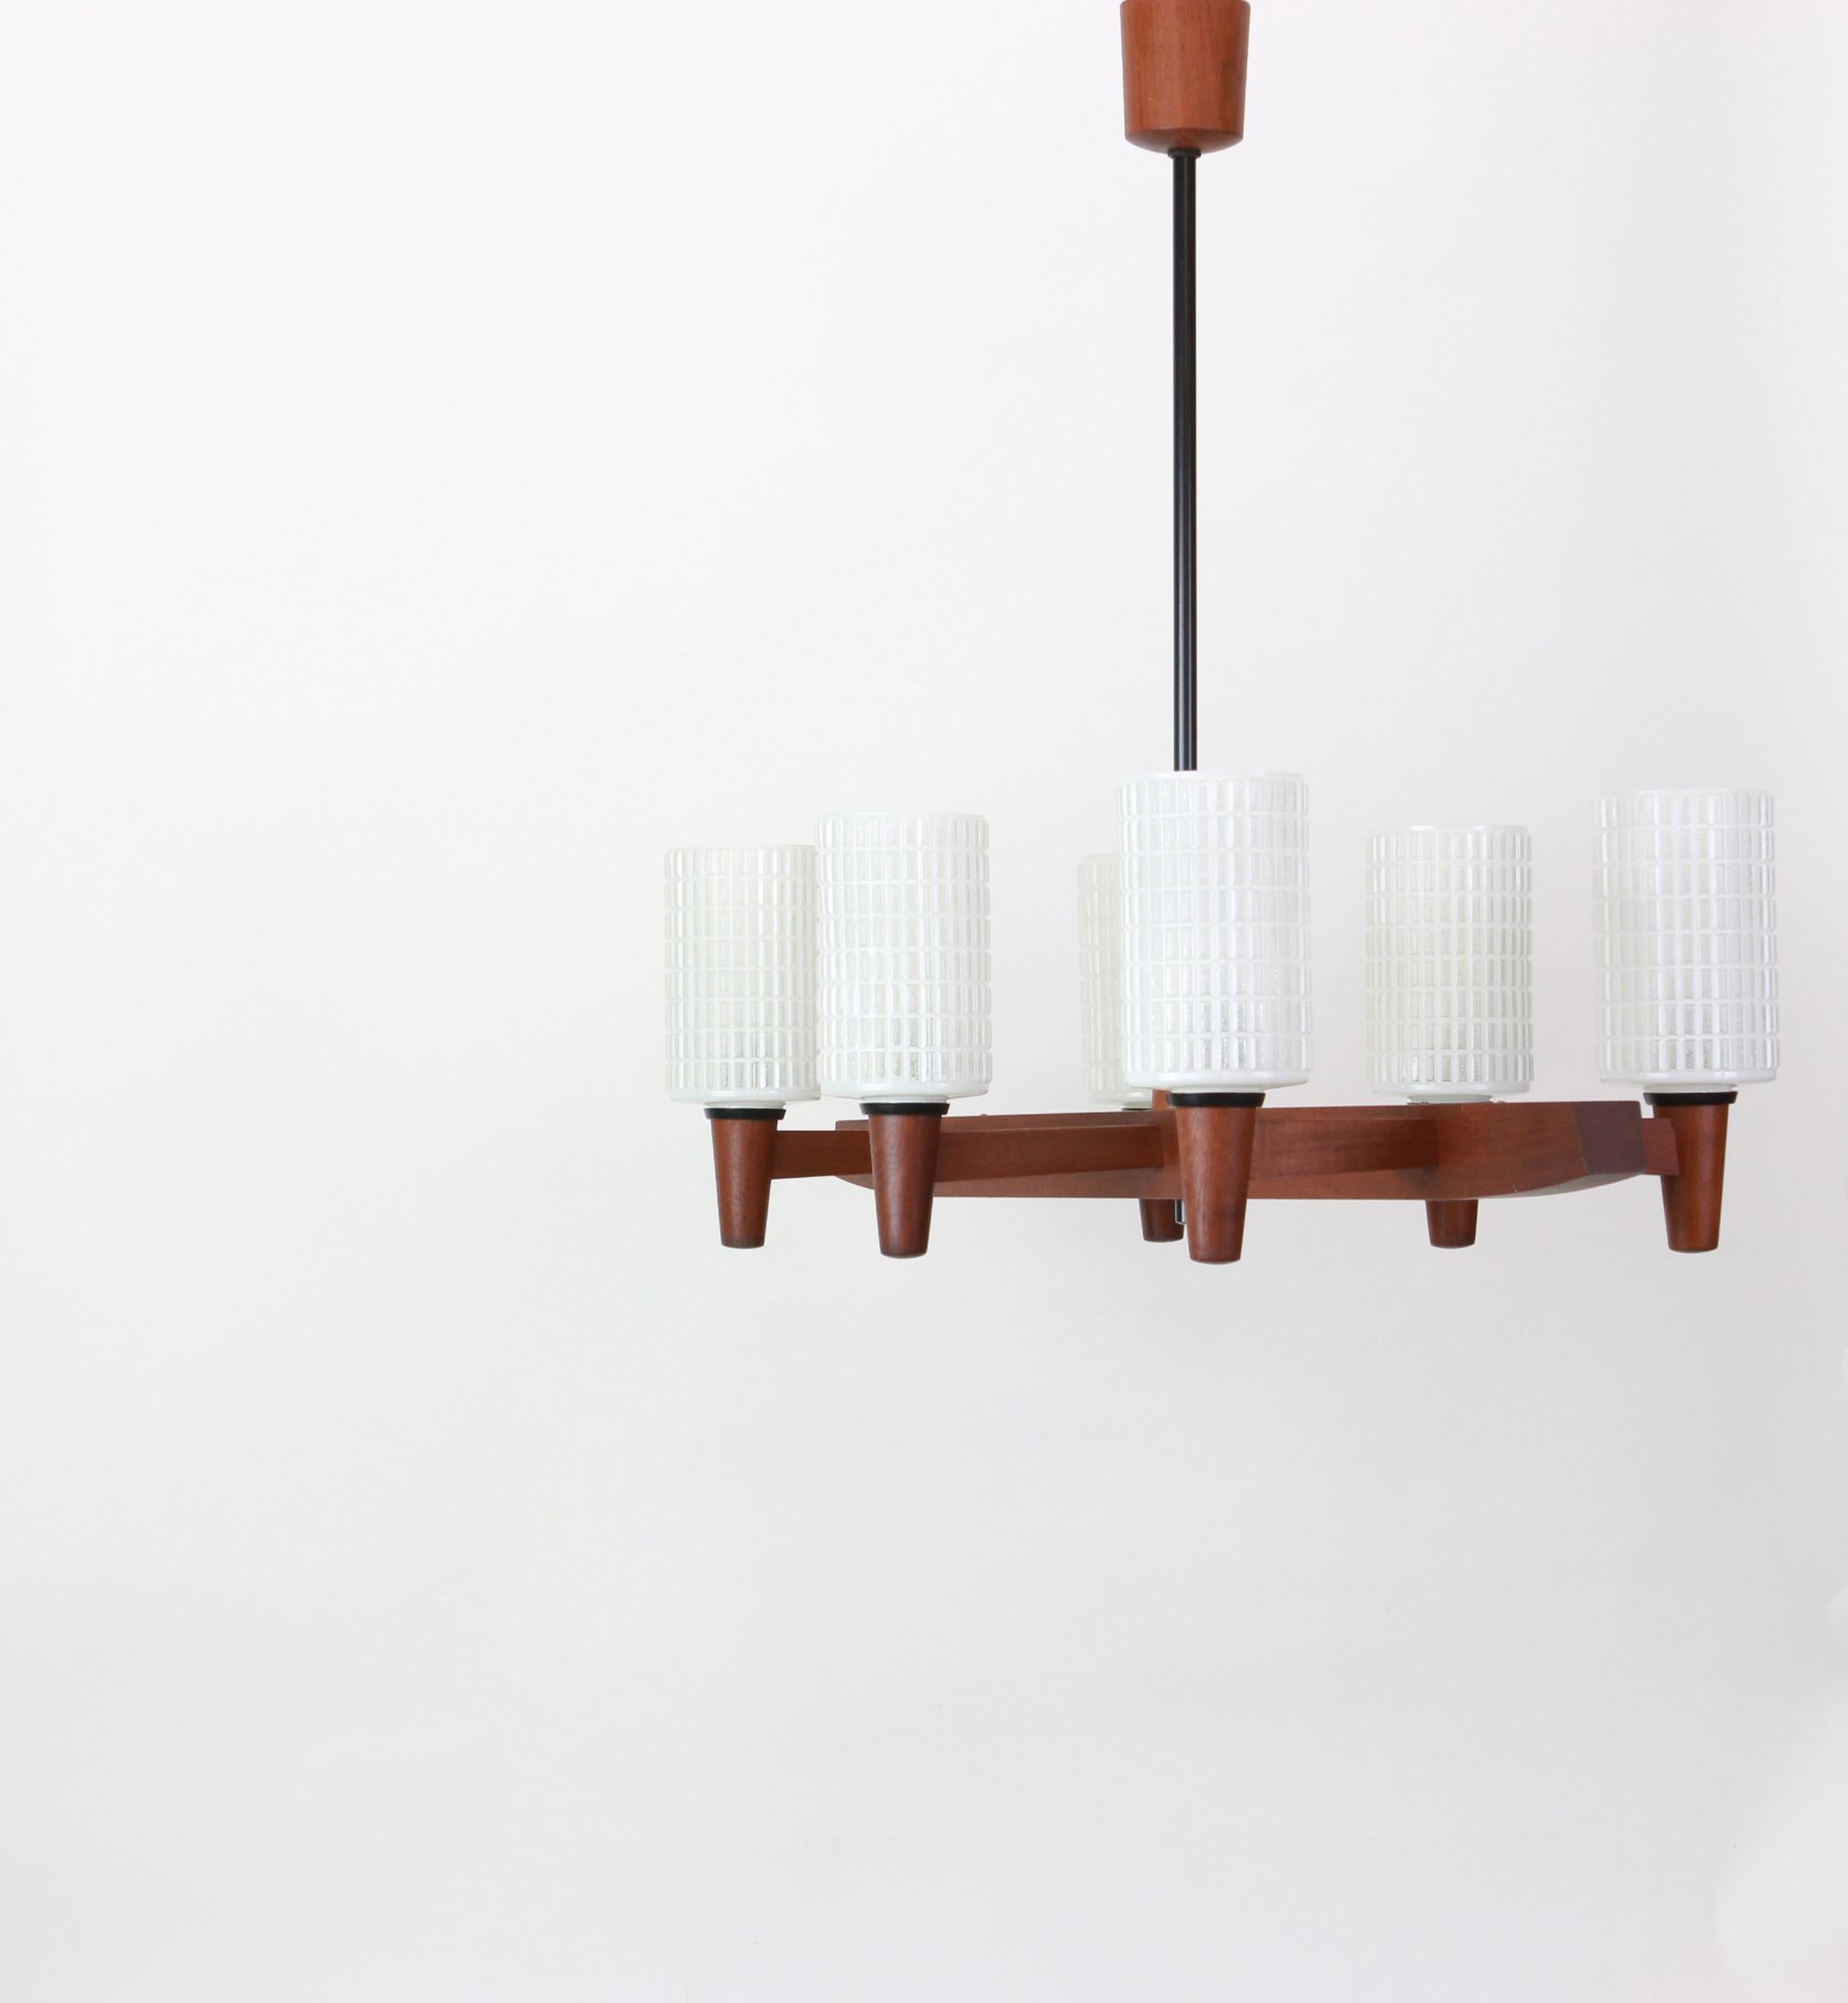 A wonderful midcentury teak chandelier. A unique, timeless and elegant masterpiece of Danish Furniture design. The light sculpture impresses with clear lines and perfect craftsmanship of the materials wood and opal glass. 

High quality and in